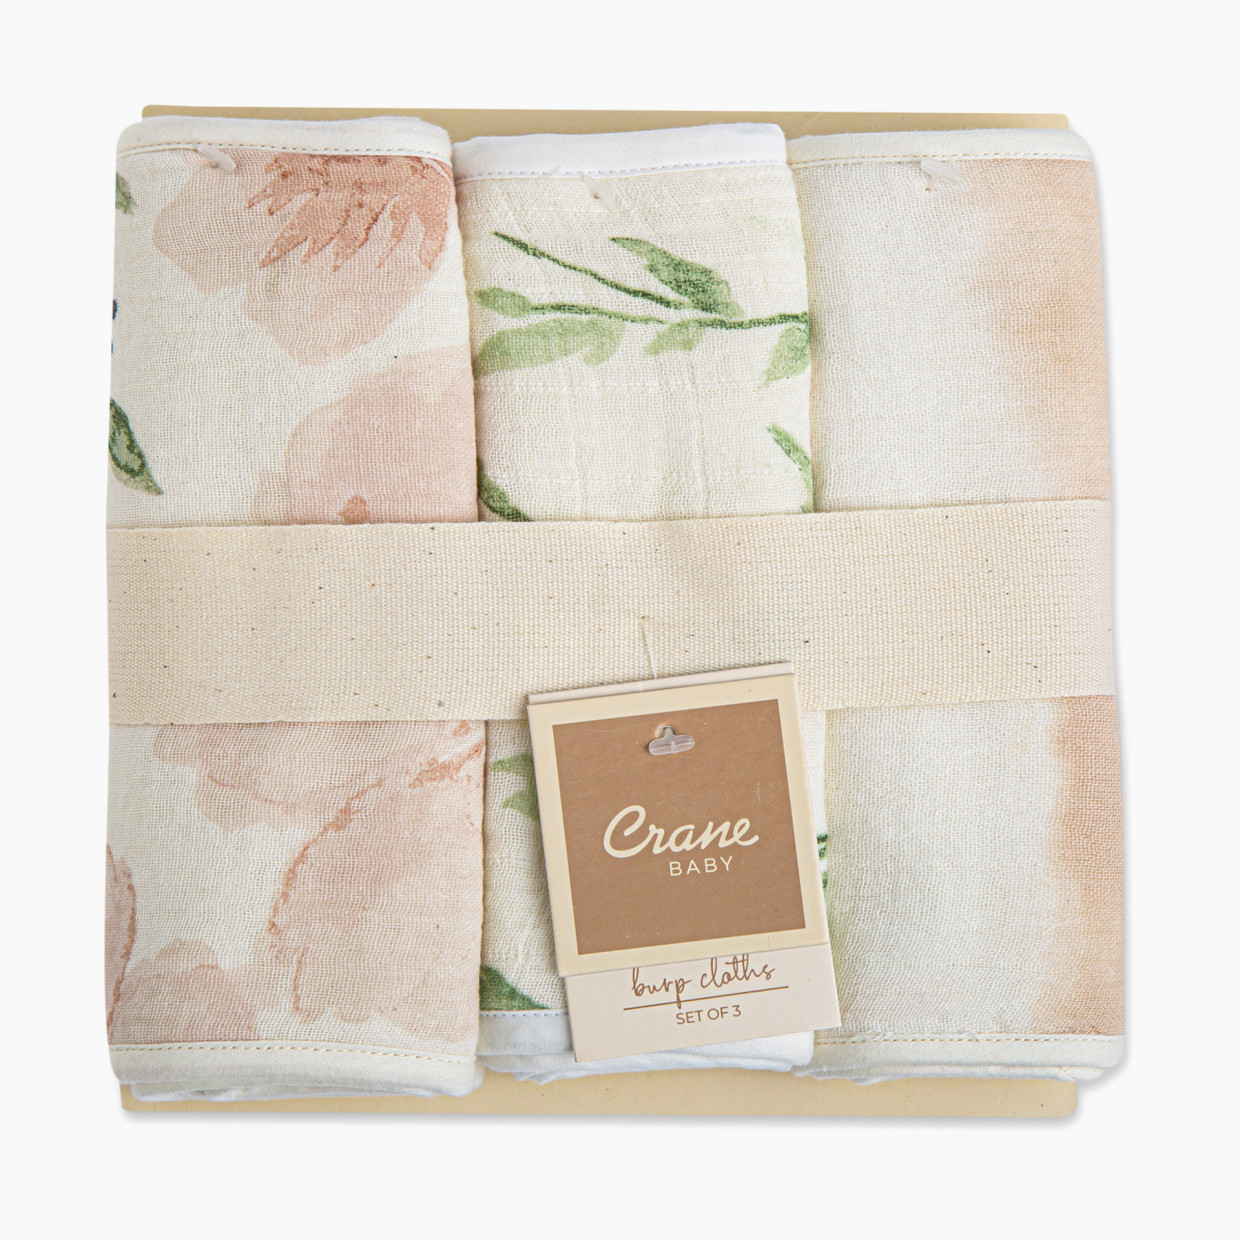 Crane Baby Cotton Muslin and Terry Burp Cloth Set (3 Pack) - Parker.